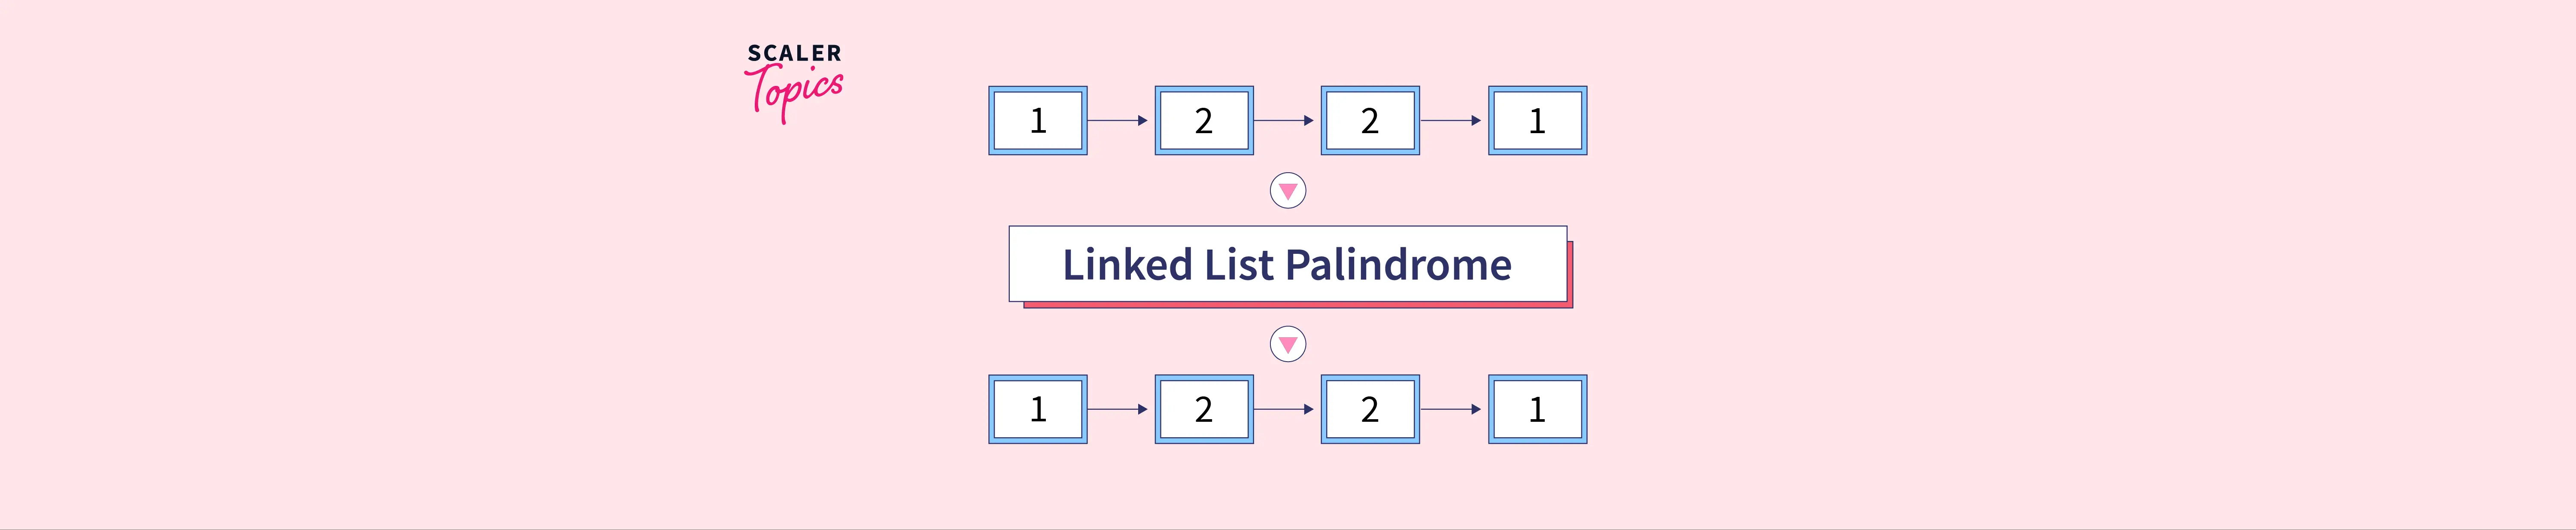 Palindrome Linked List Scaler Topics